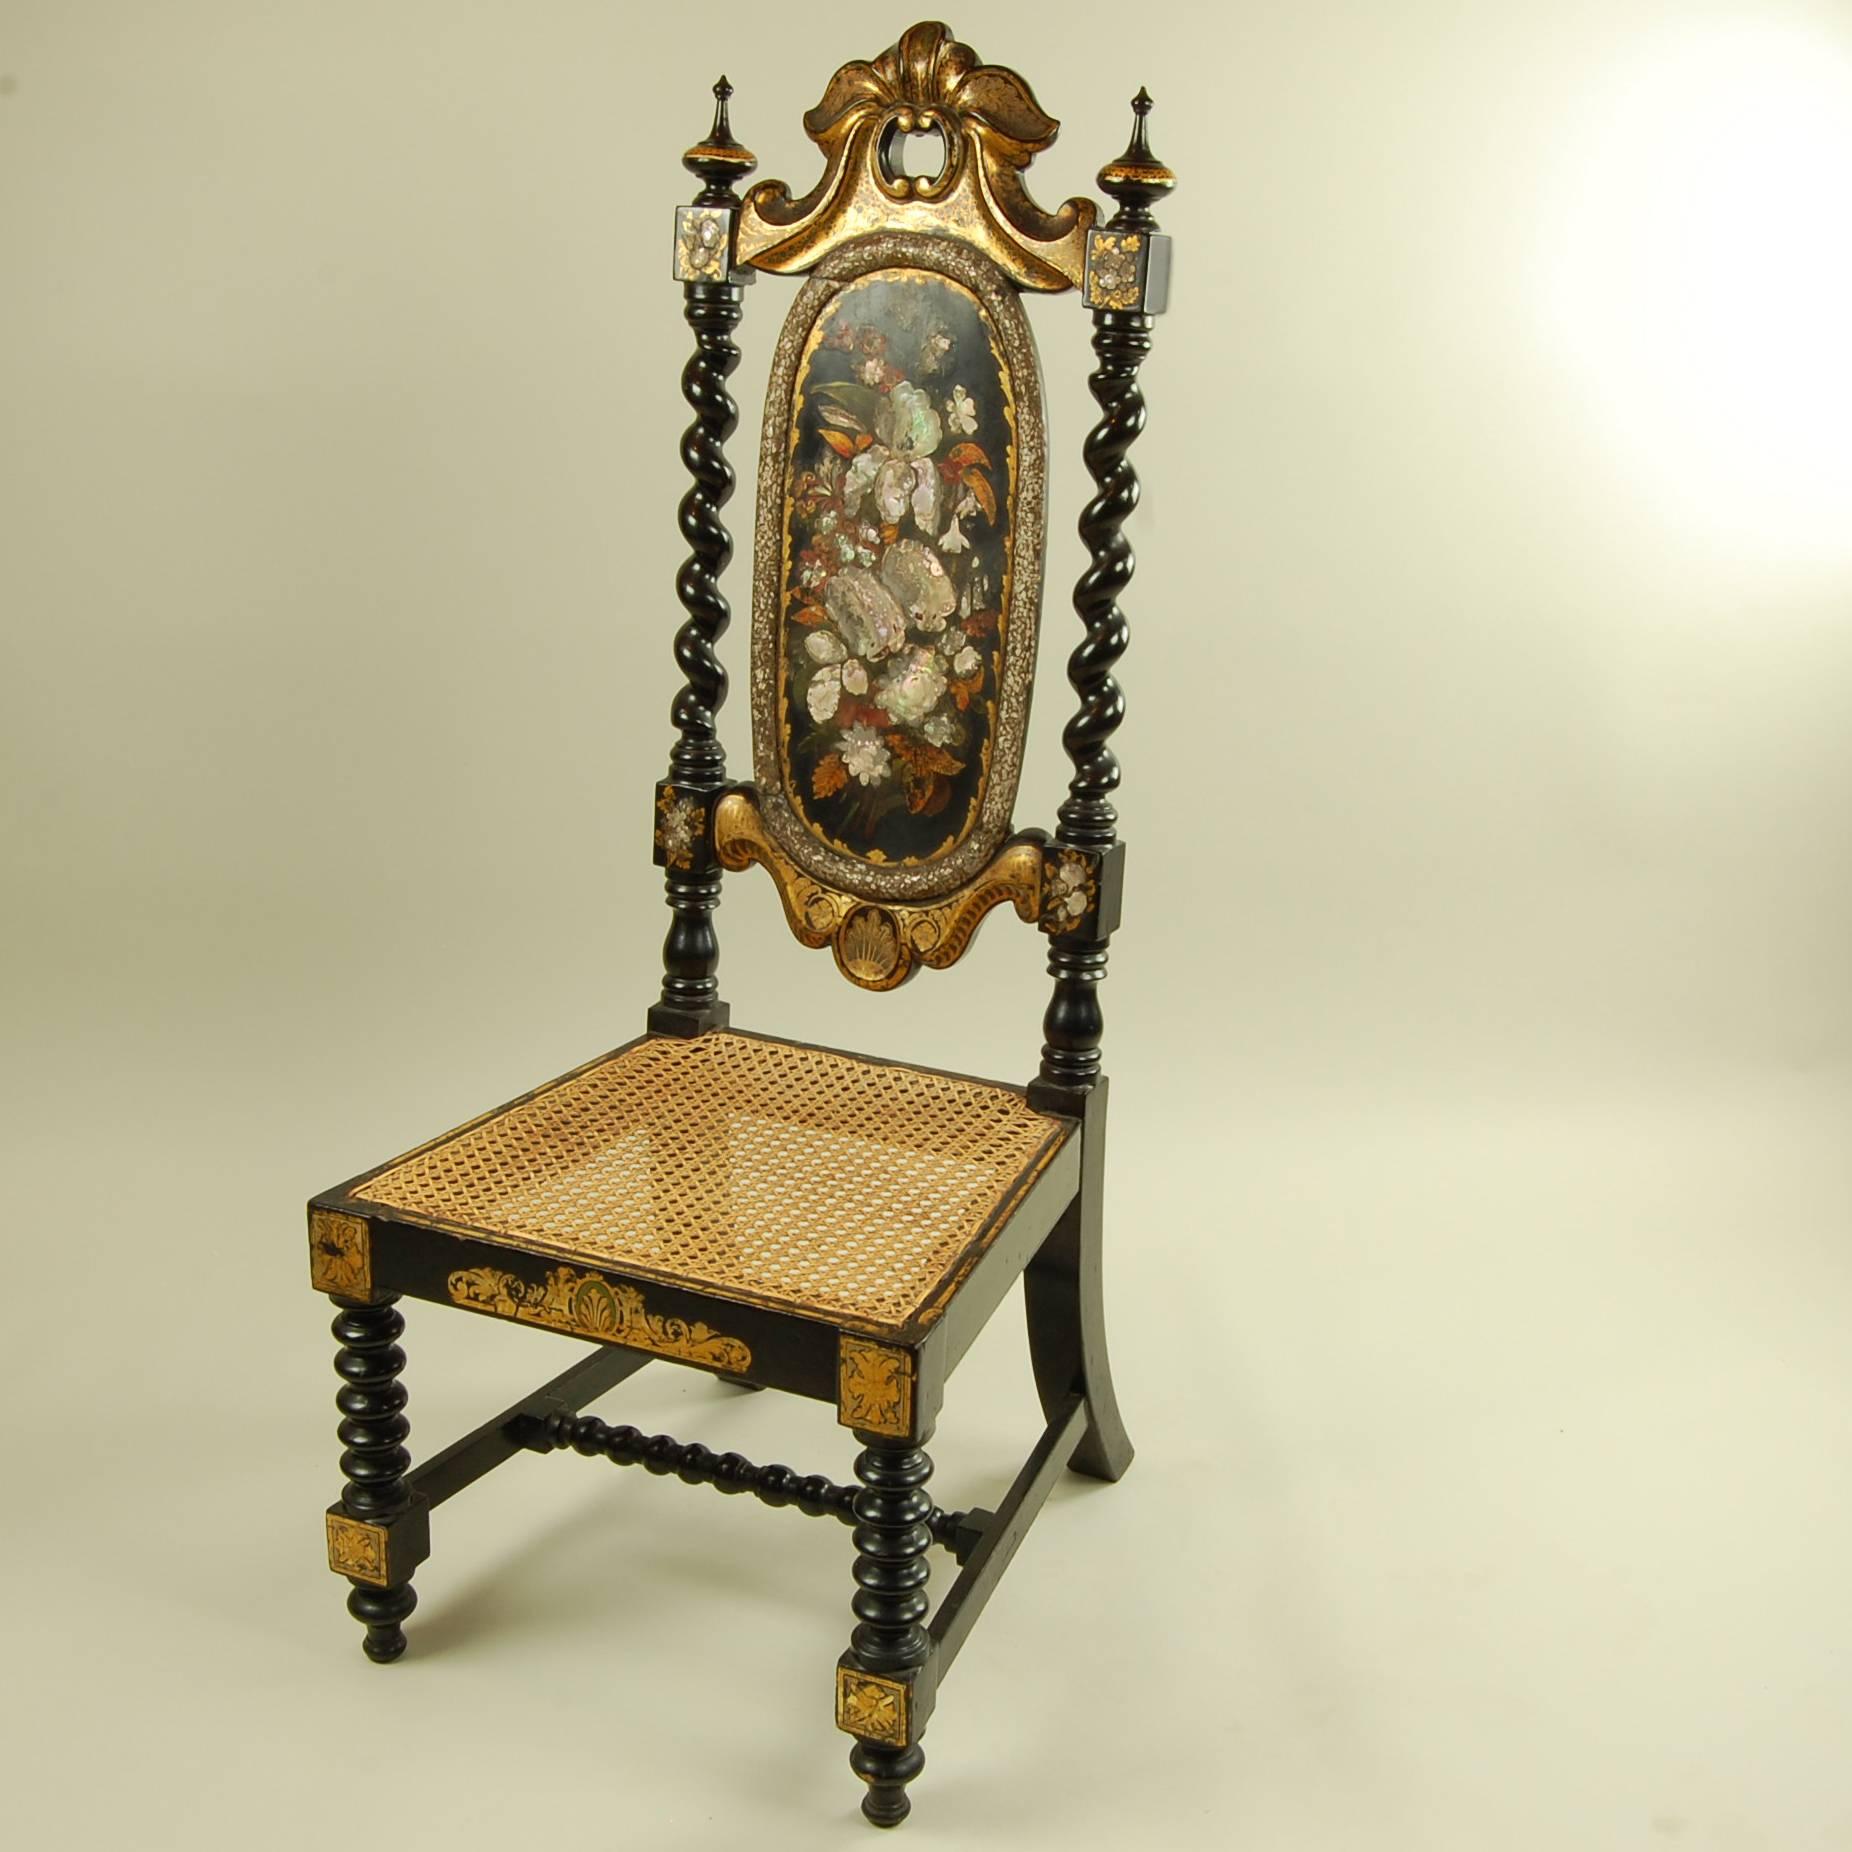 Beautifully wrought, and obviously rarely sat in over the years, this ornate side chair would make a perfect accent piece for a formal entry hall or parlor. A unique blend of traditional styles, dating from circa 1890. Sturdy ebonized wood with